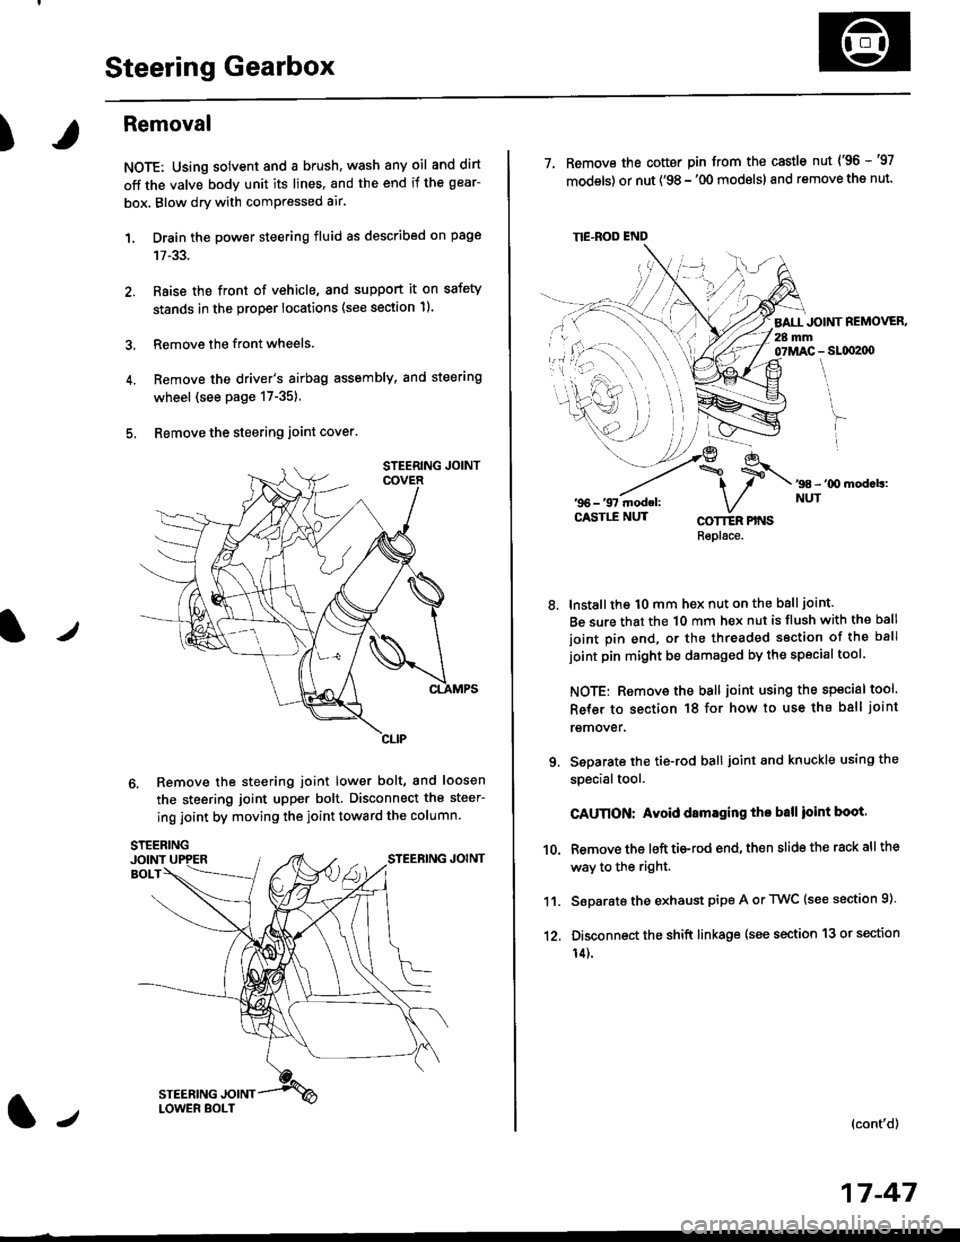 HONDA CIVIC 1996 6.G Owners Guide Steering Gearbox
)
Removal
NOTE: Using solvent and a brush, wash any oil and dirt
off the valve body unit its lines. and the end if the gear-
box. Blow dry with comPressed air.
1. Drain the power stee